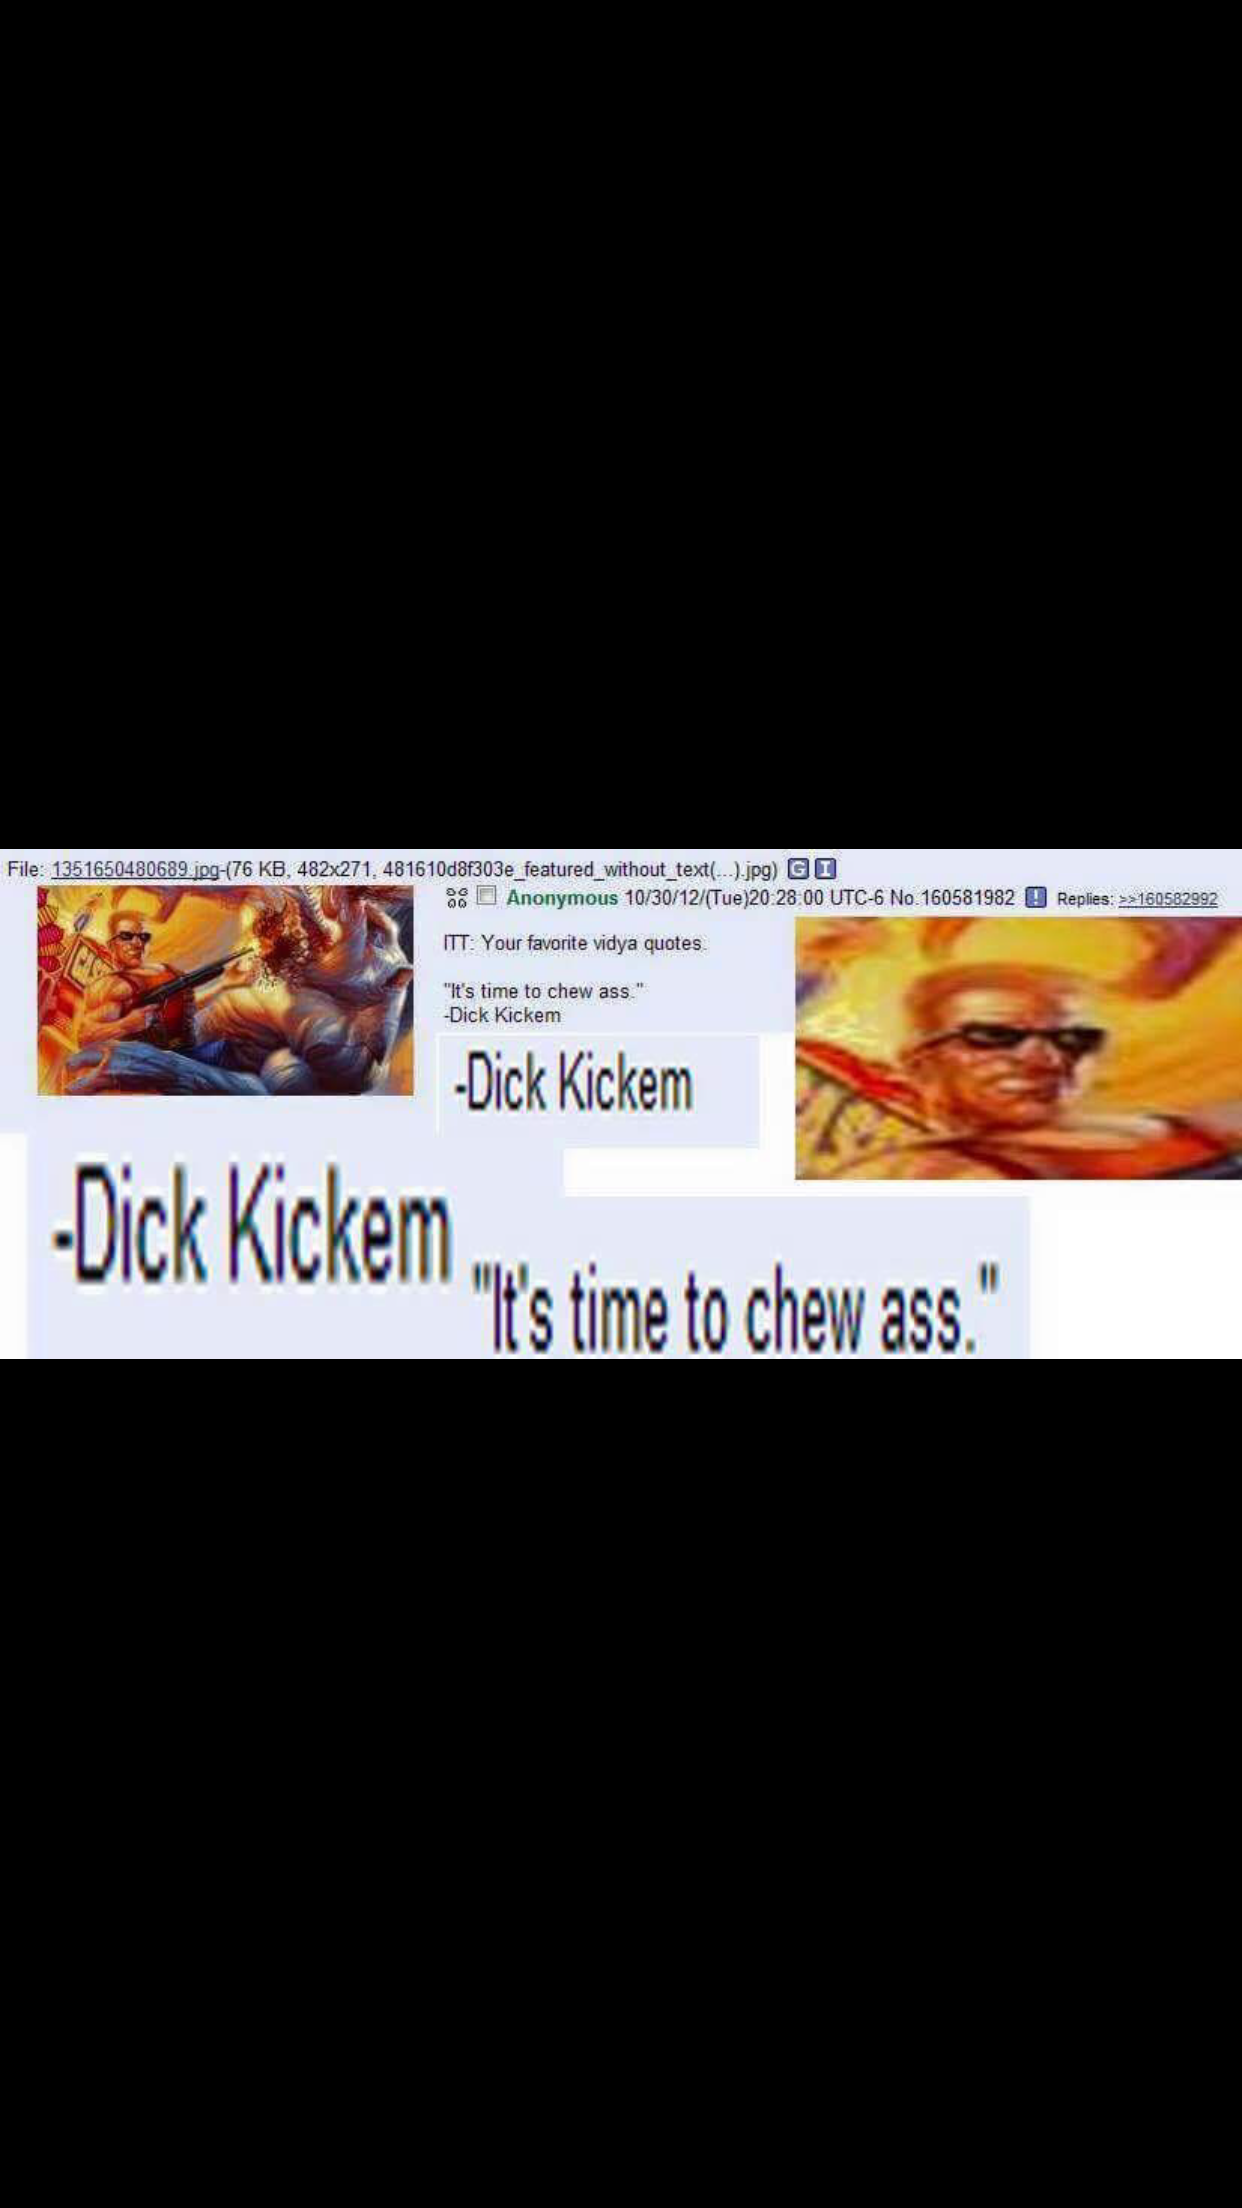 i m all out of ass - Dick Kickem "It's time to chew ass."